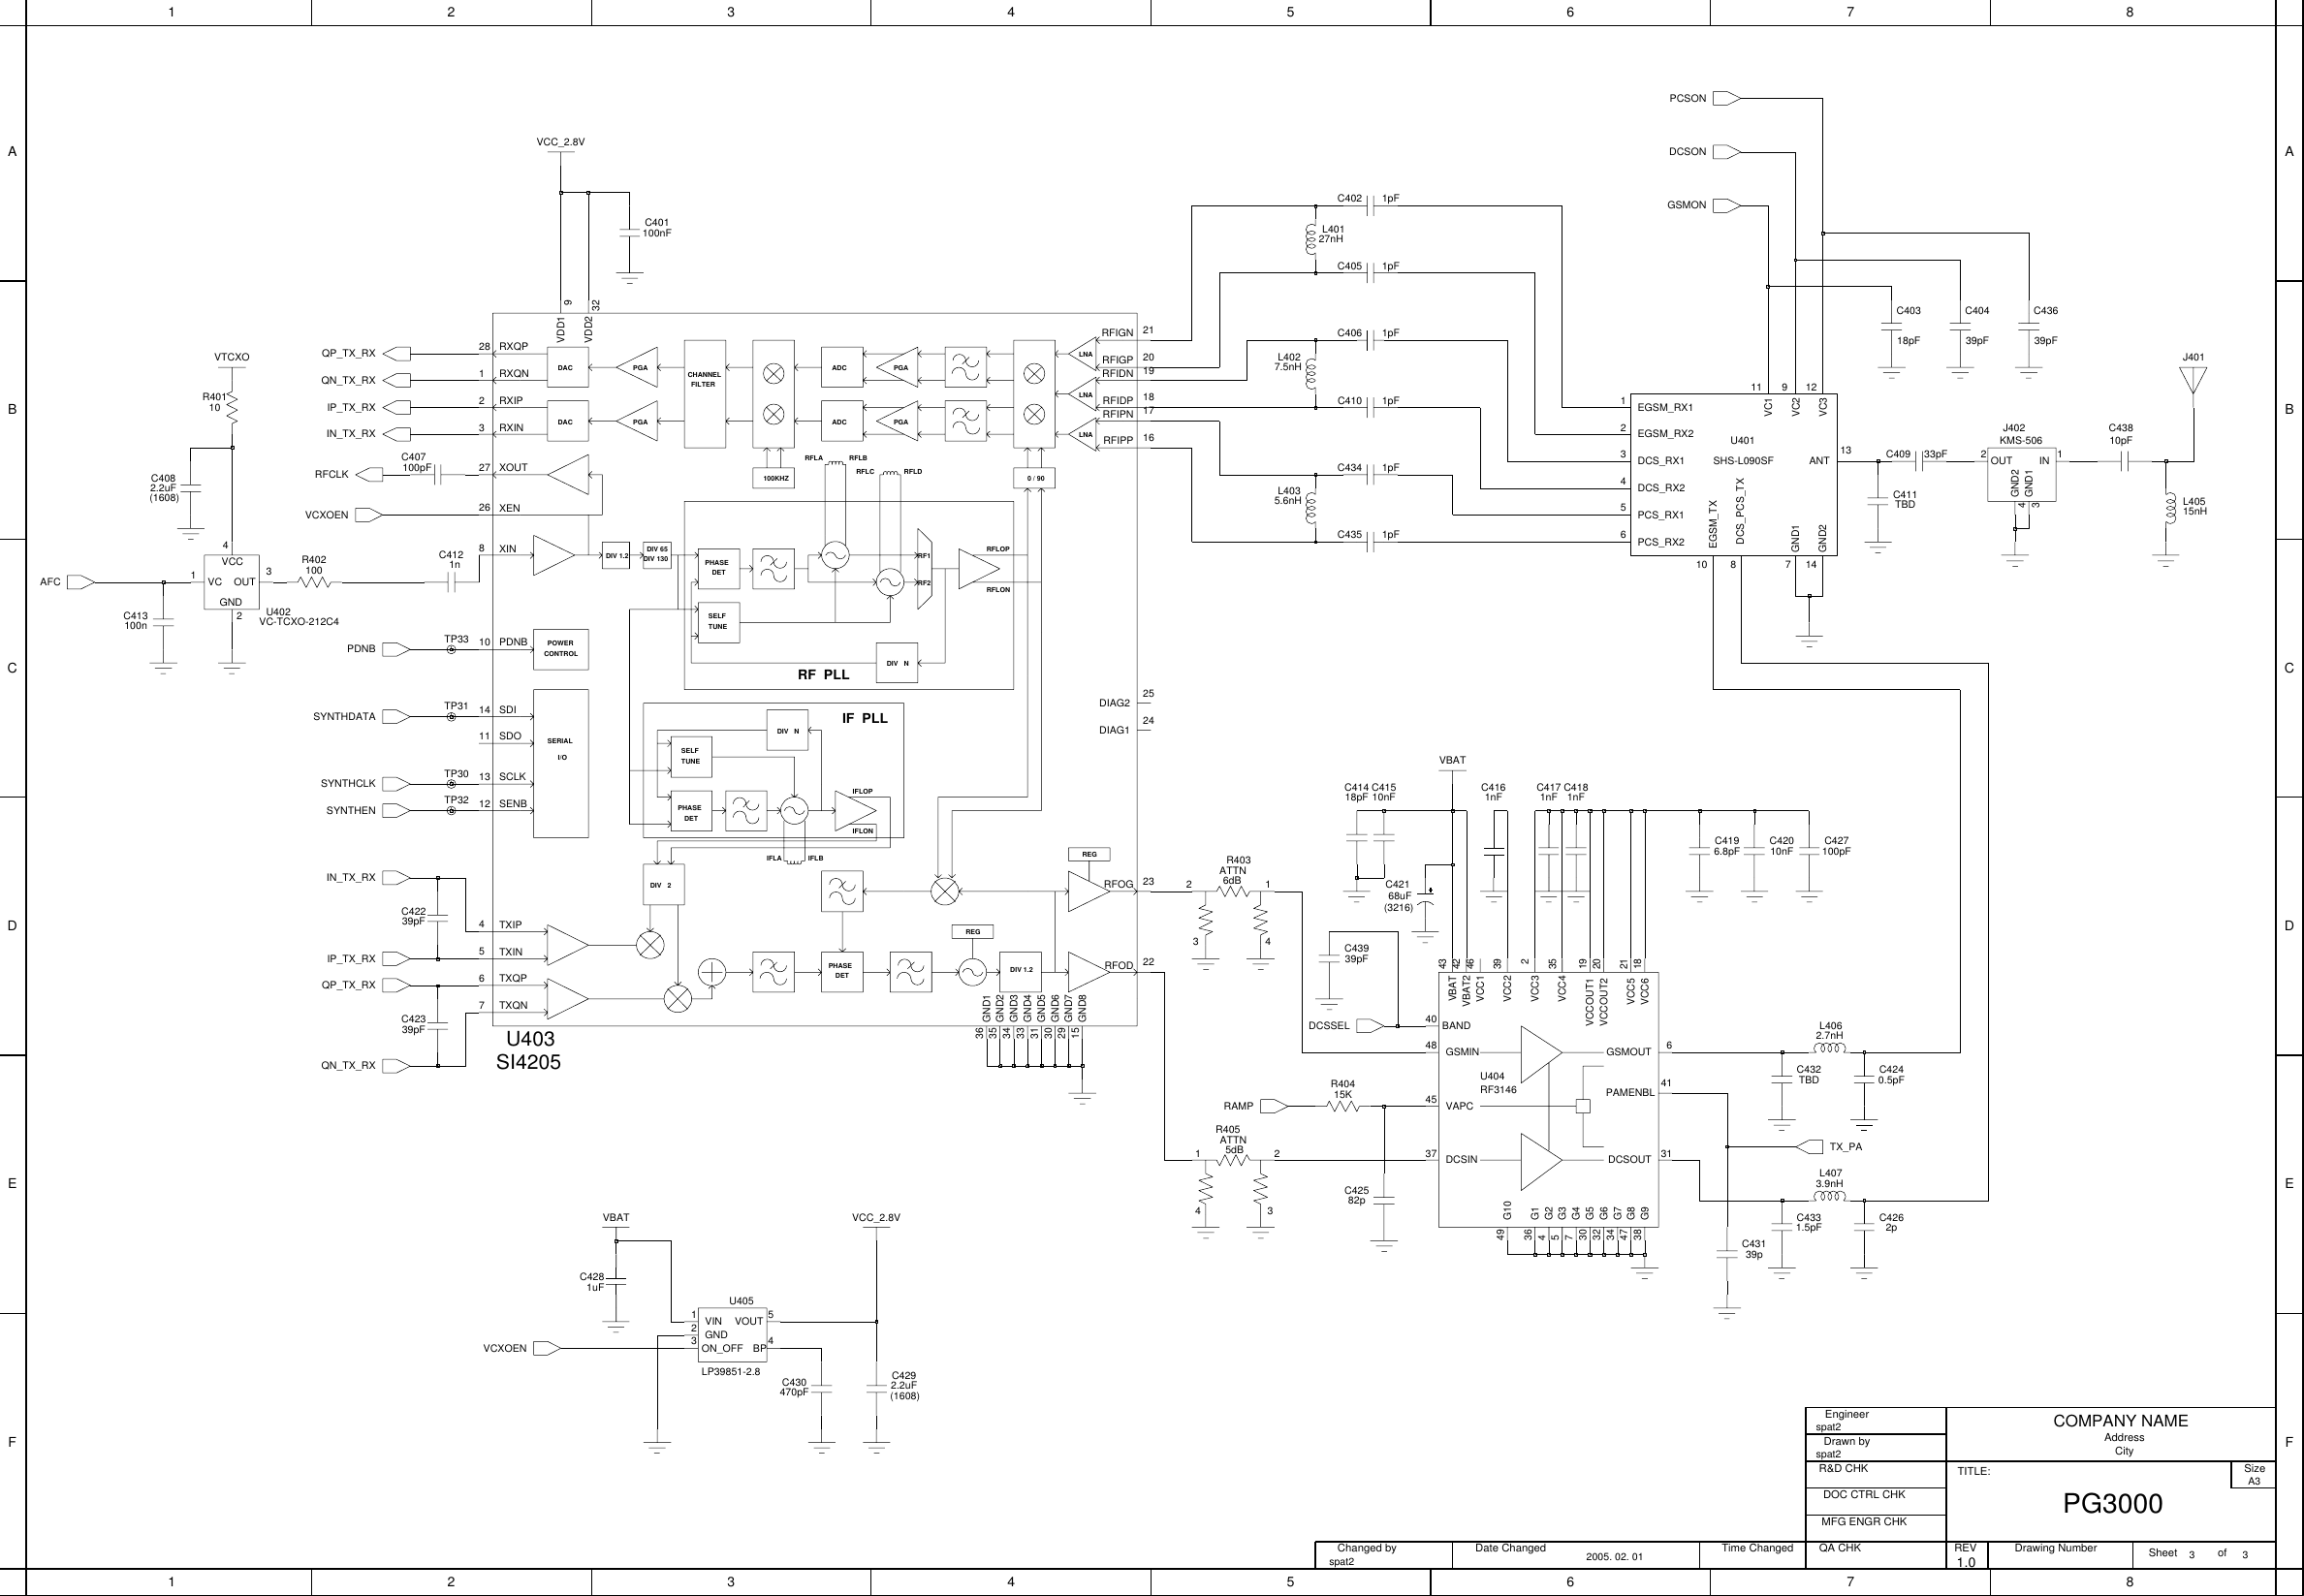 Page 2 of 8 - Pantech-pg3000-schematics